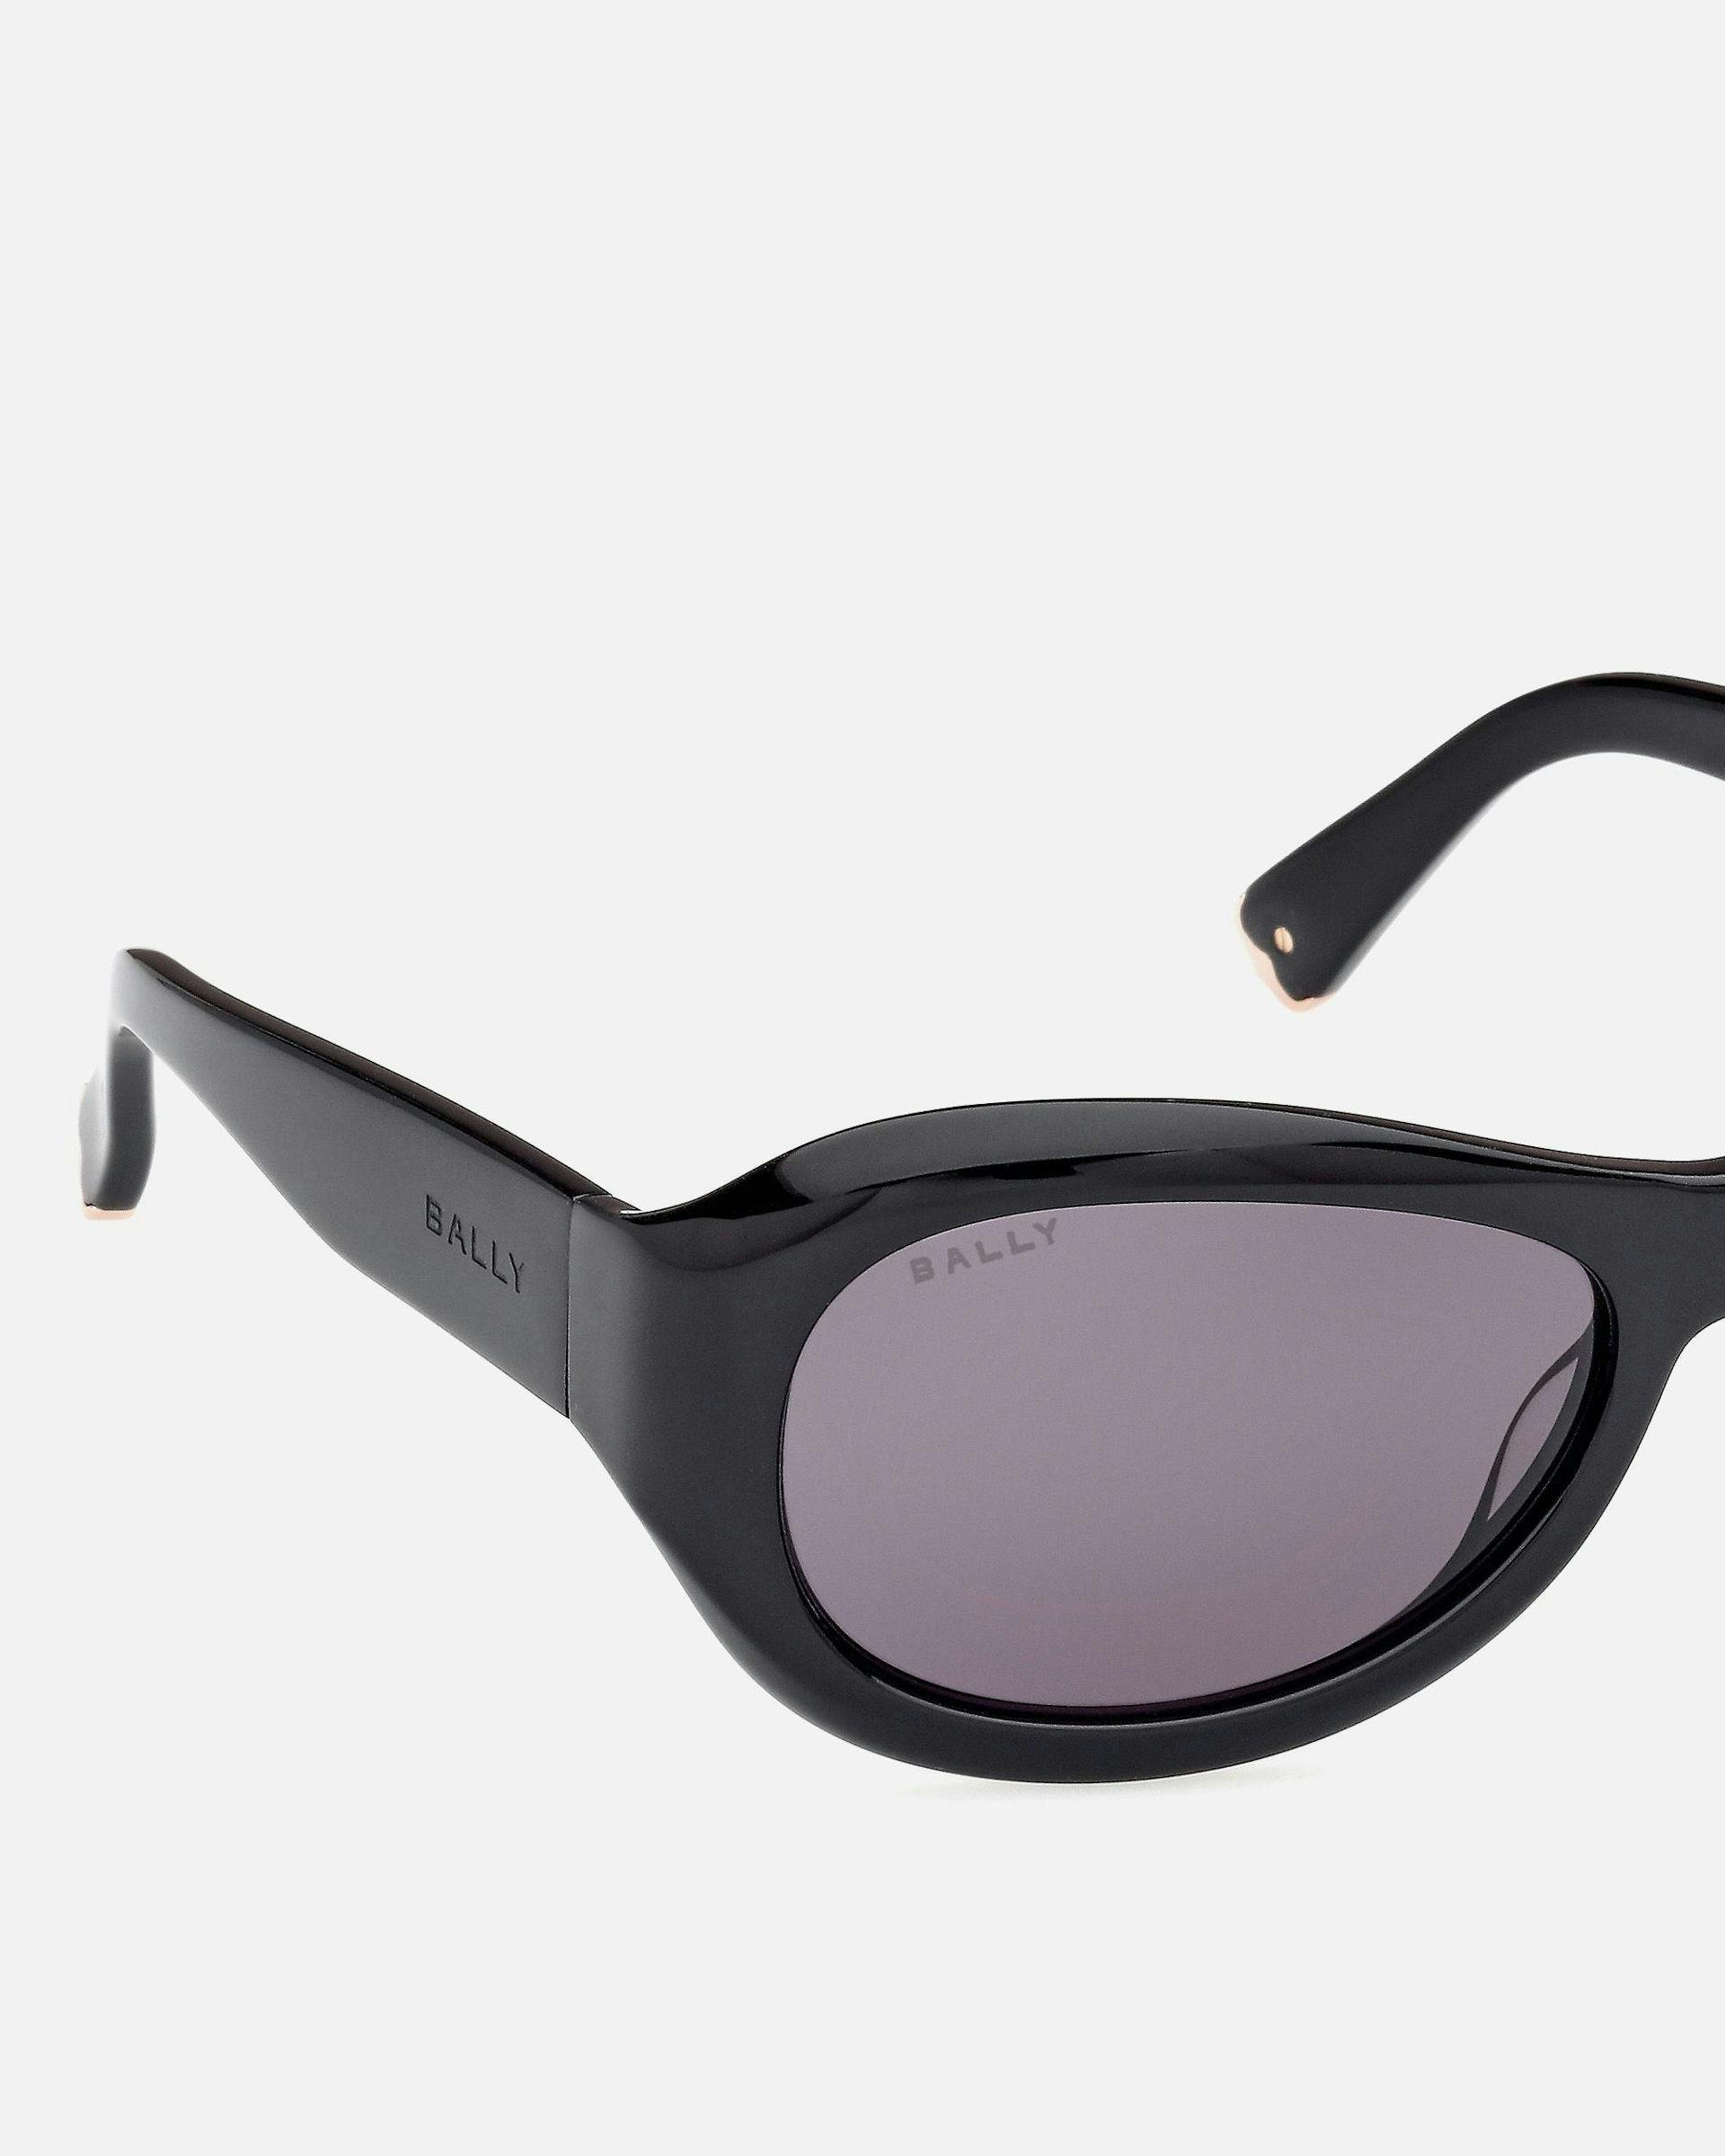 Maurice Acetate Sunglasses in Black and Smoke | Bally | Still Life Detail